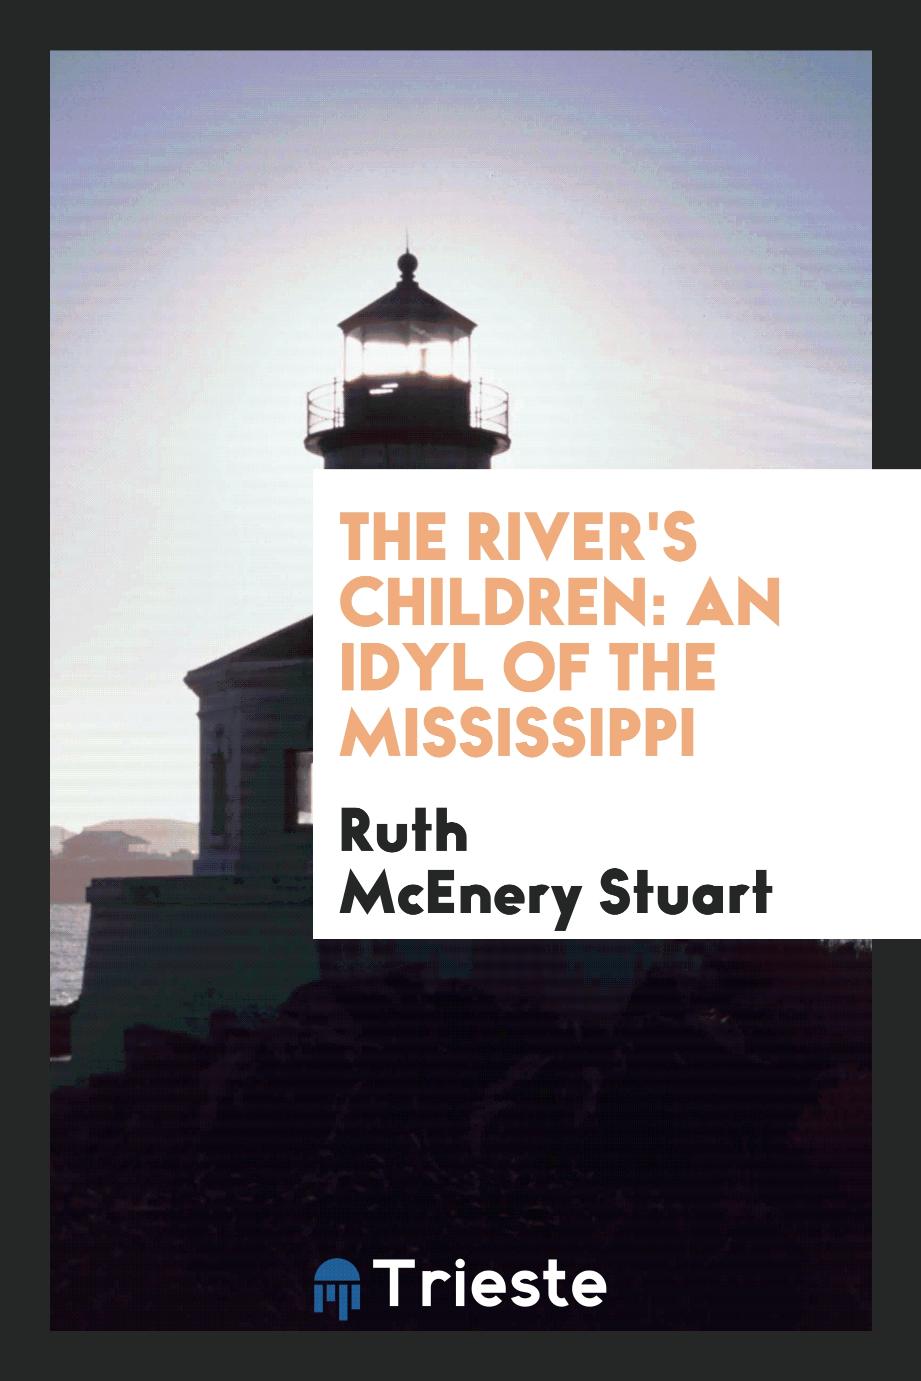 The river's children: an idyl of the Mississippi